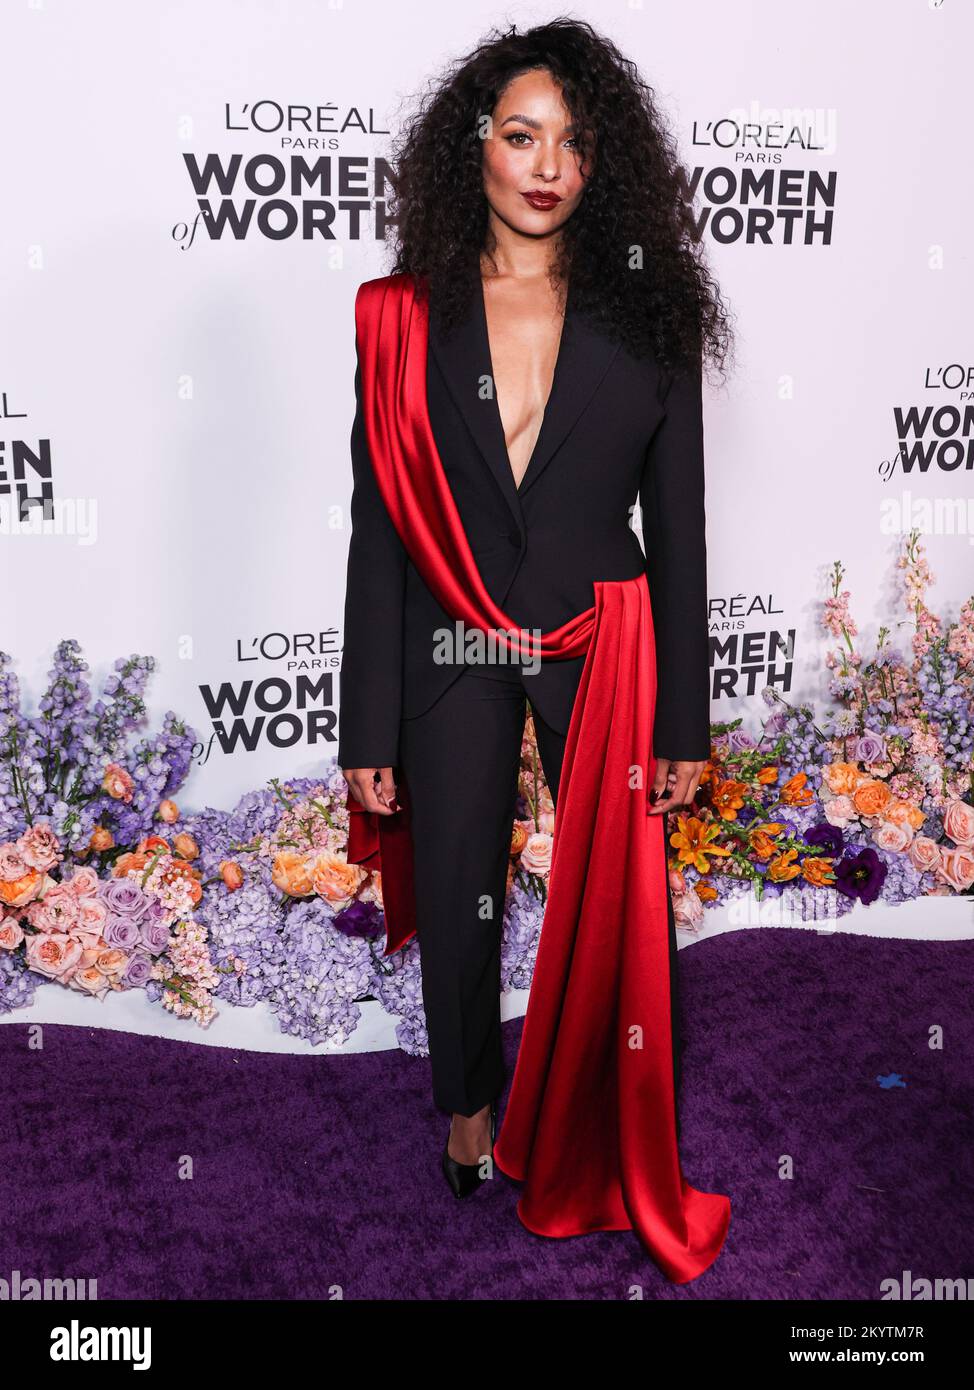 Los Angeles, United States. 01st Dec, 2022. LOS ANGELES, CALIFORNIA, USA - DECEMBER 01: American actress Kat Graham arrives at the L'Oreal Paris' Women Of Worth Celebration 2022 held at The Ebell of Los Angeles on December 1, 2022 in Los Angeles, California, United States. (Photo by Xavier Collin/Image Press Agency) Credit: Image Press Agency/Alamy Live News Stock Photo